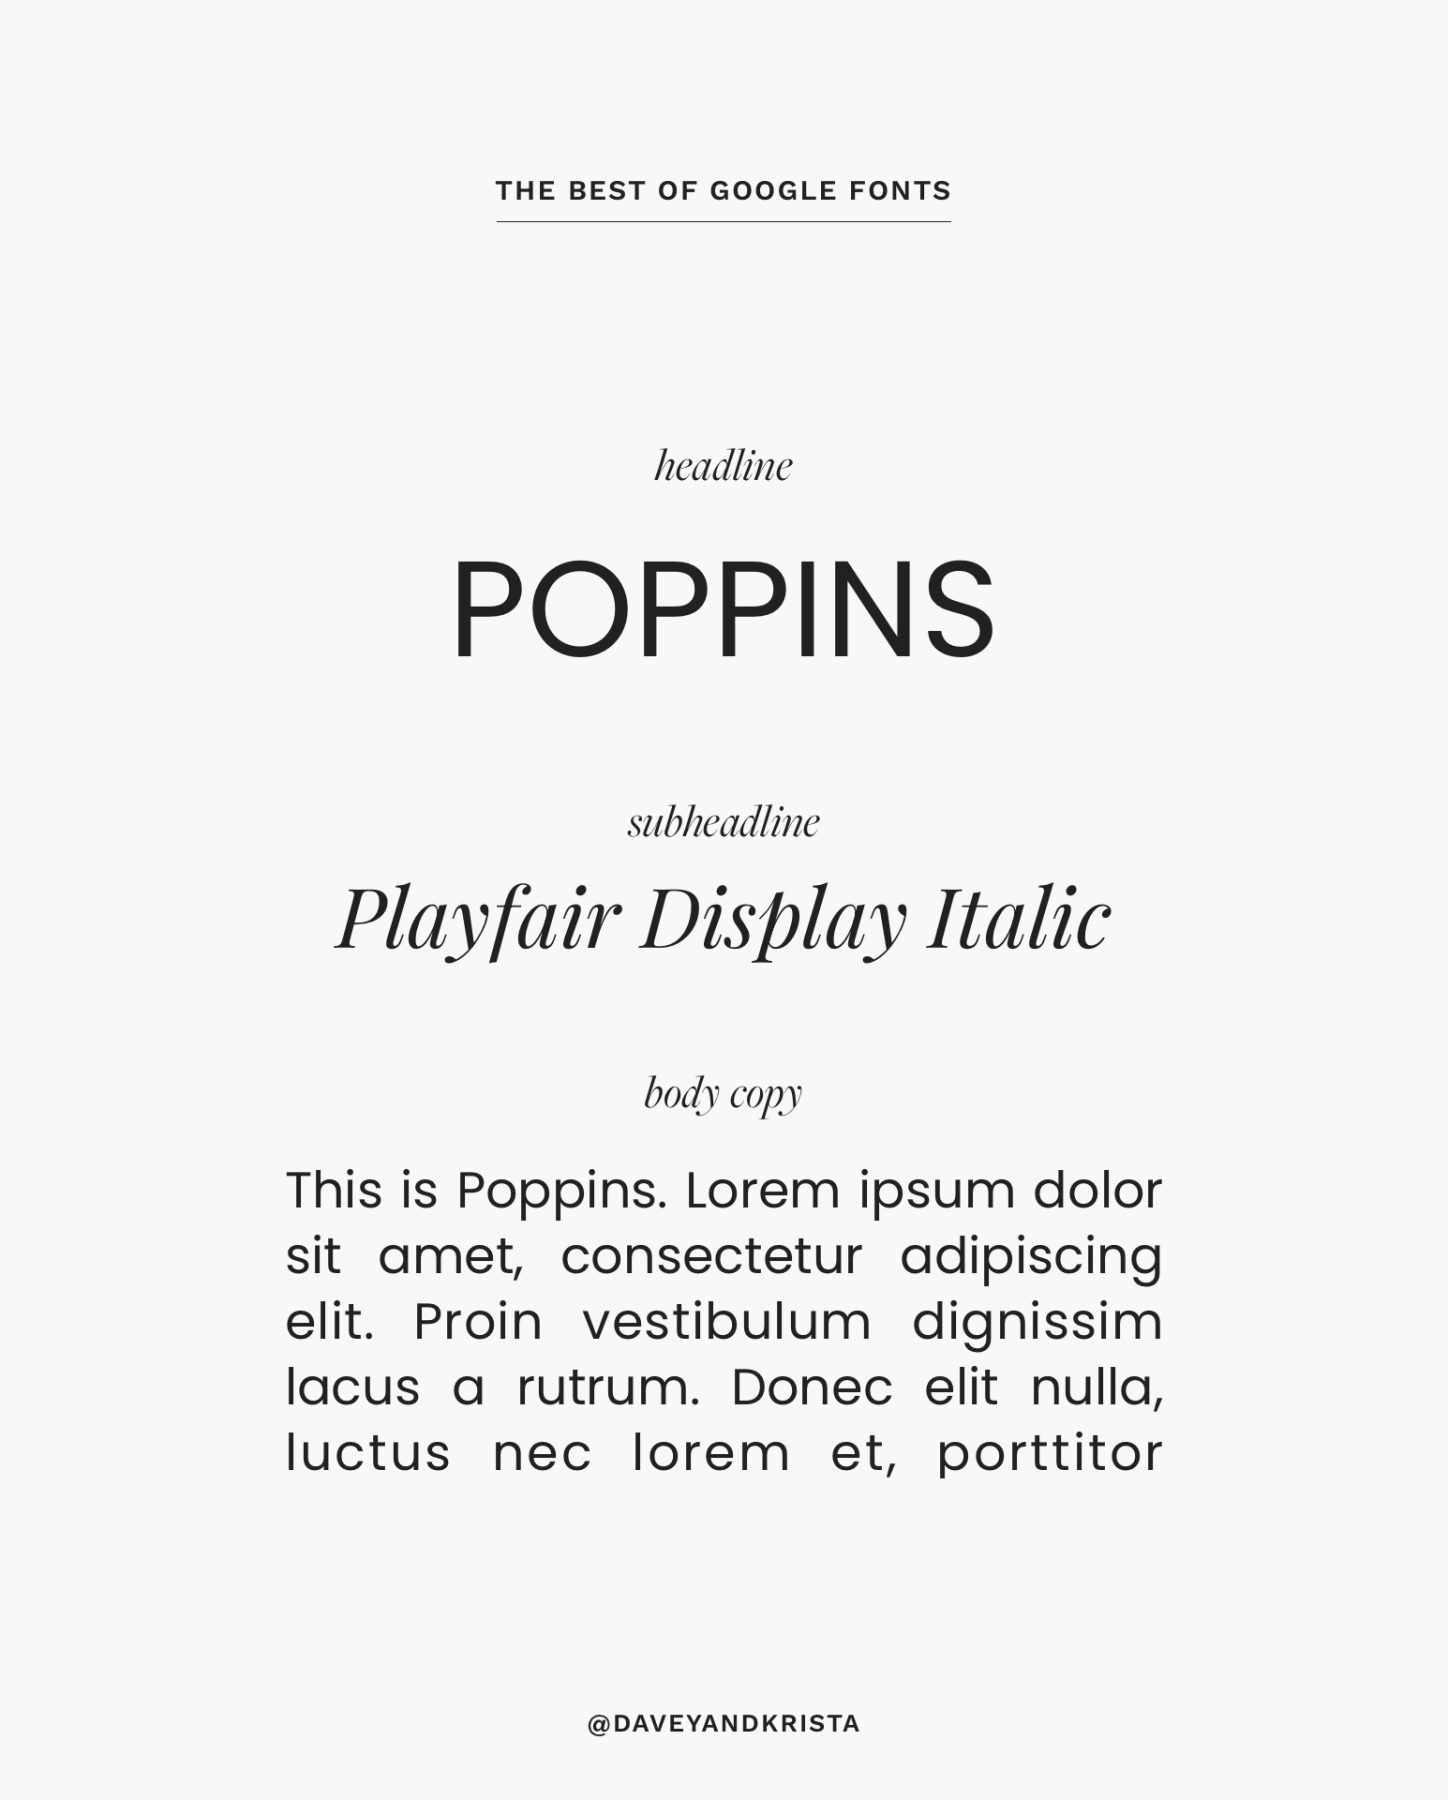 The Best of Google Fonts - Poppins and Playfair Display Italic | Via Davey & Krista
